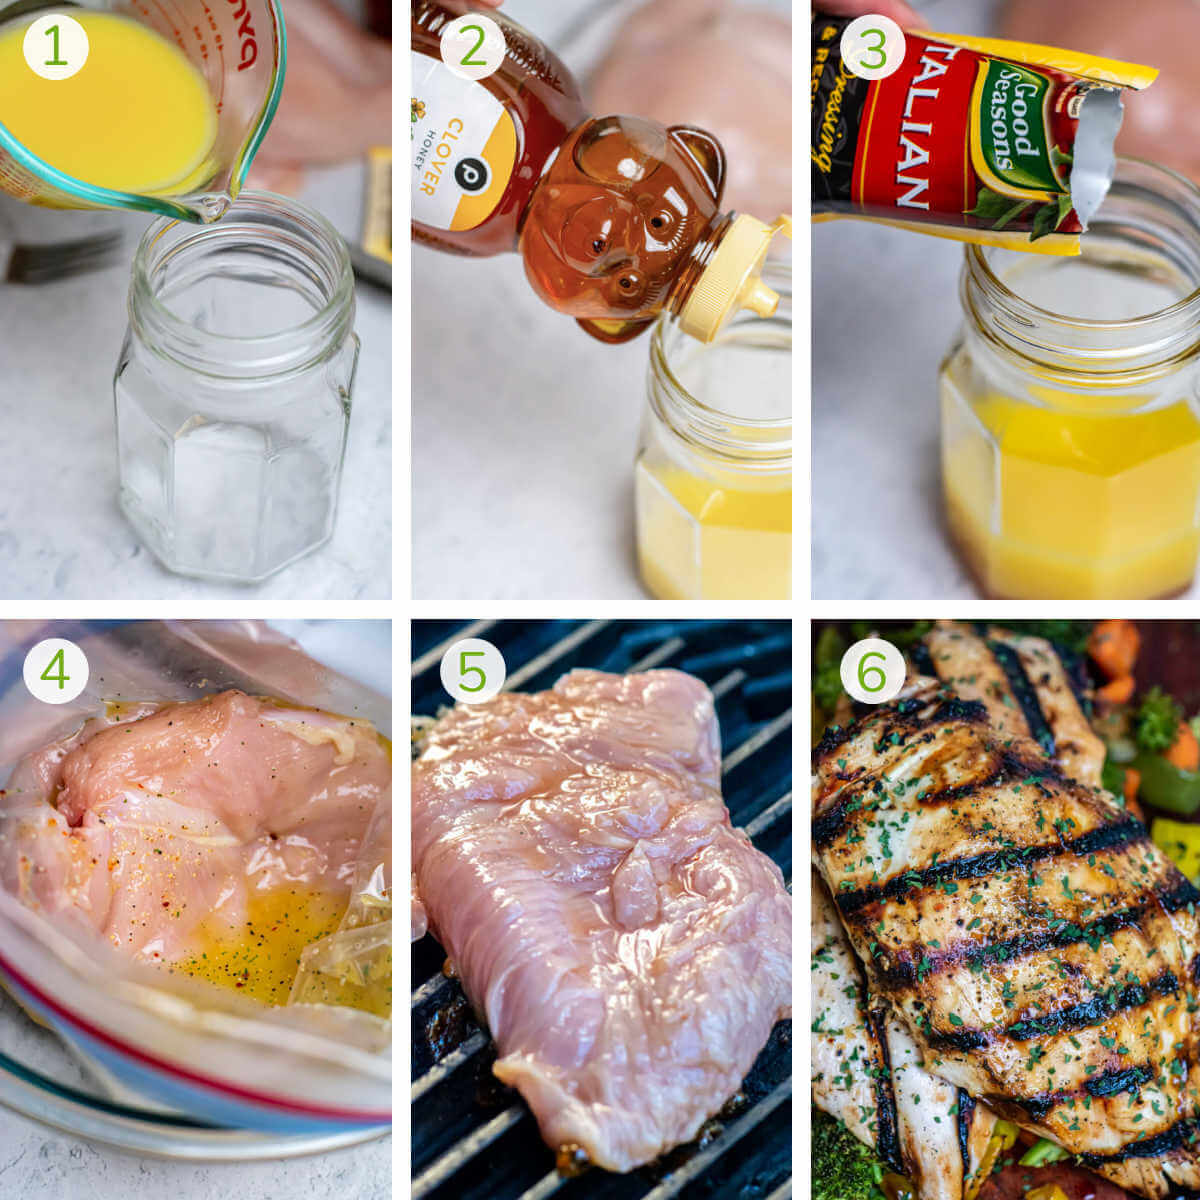 process photos showing how to make the marinade with honey, orange juice, and Italian seasoning and then grilling it.